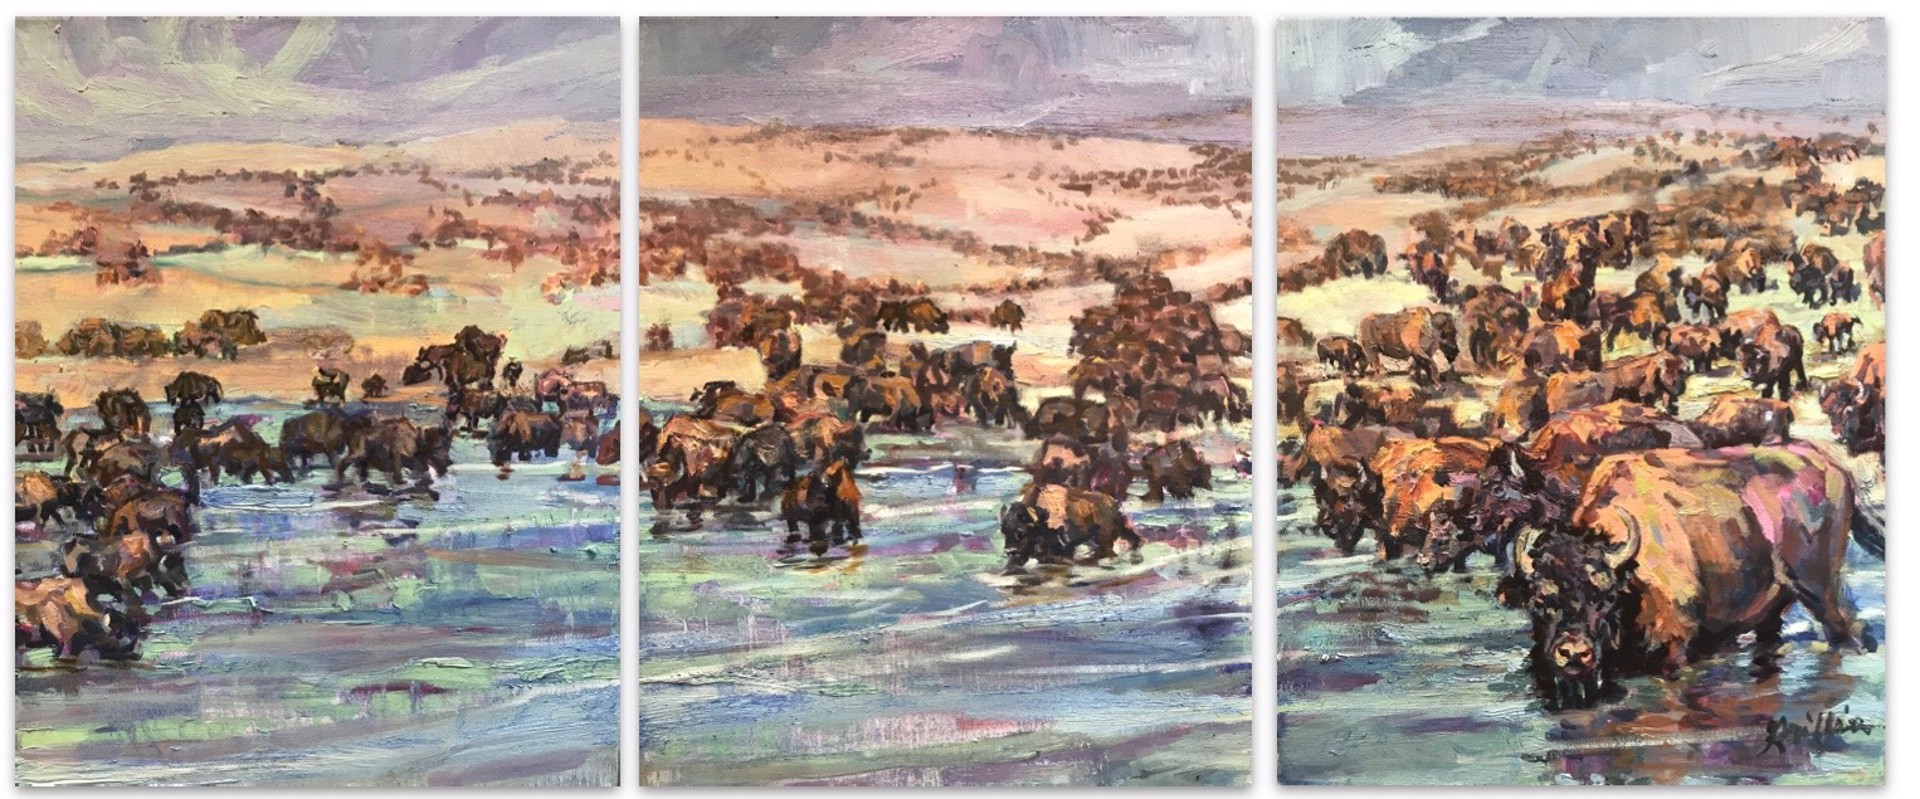 Original Triptych Oil Painting By Patricia Griffin Of Bison Herds In A Valley, Available At Gallery Wild